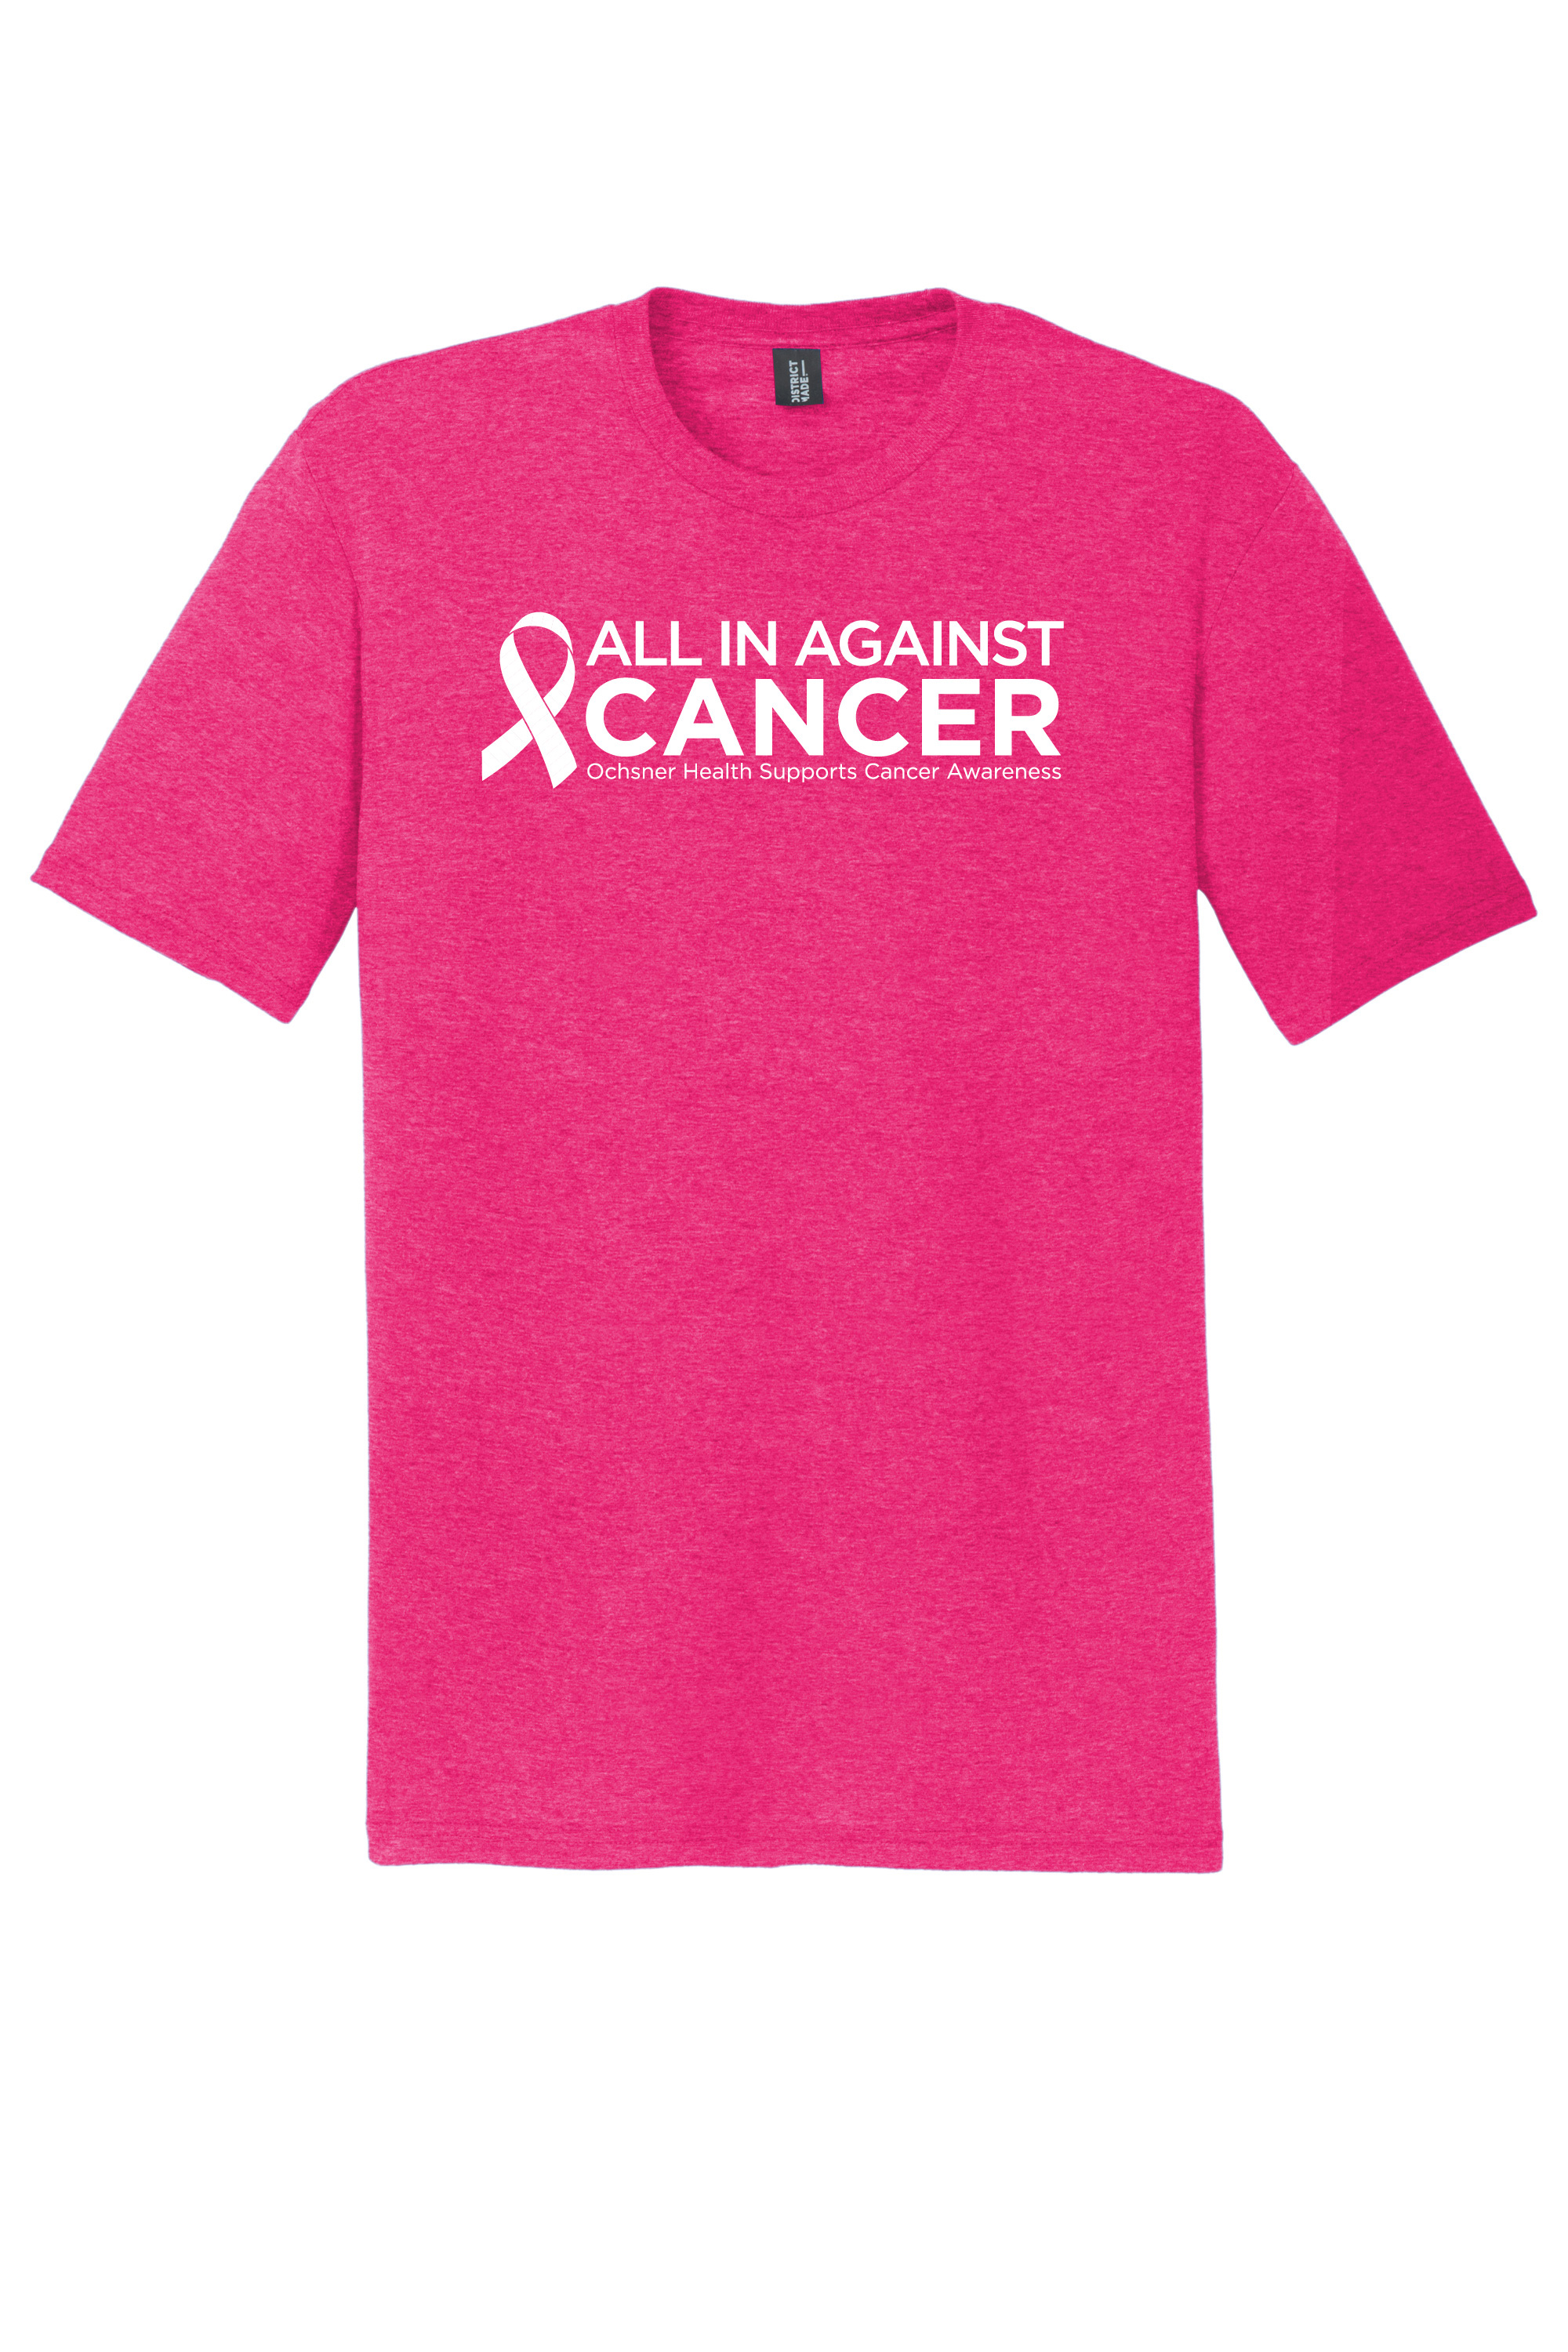 All in Against Cancer Unisex T-Shirt, , large image number 3